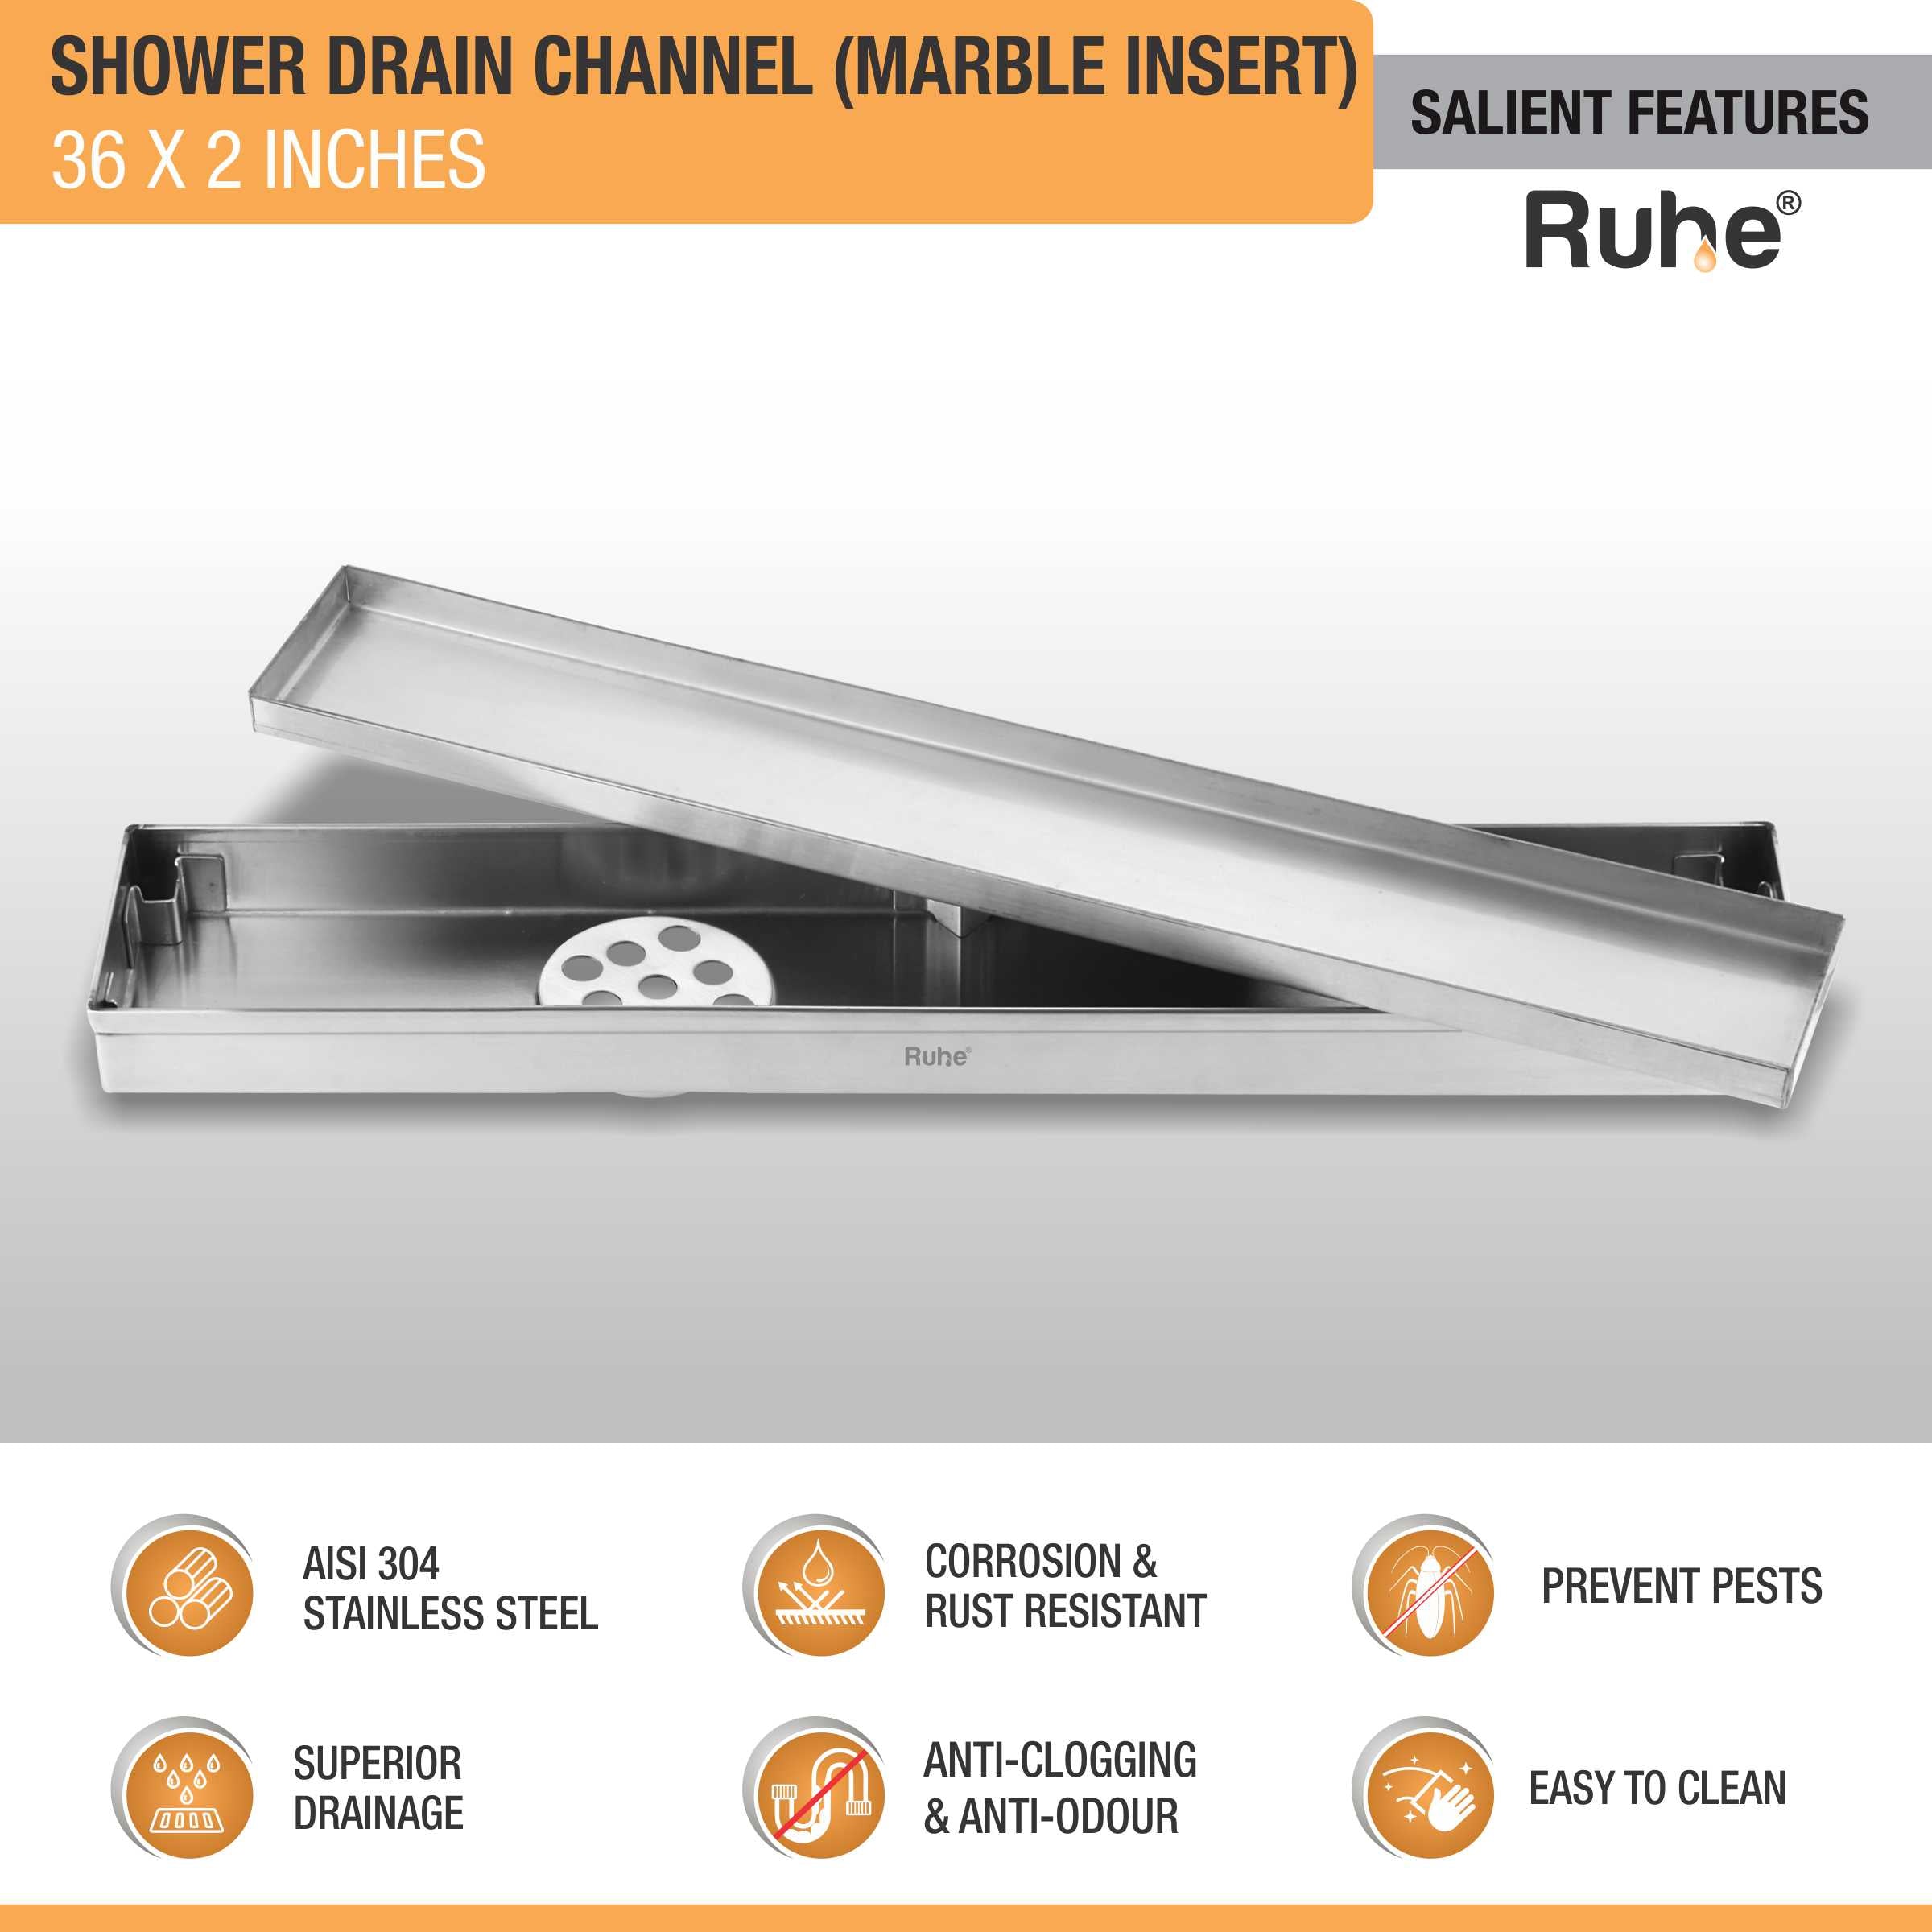 Marble Insert Shower Drain Channel (36 x 2 Inches) (304 Grade) features